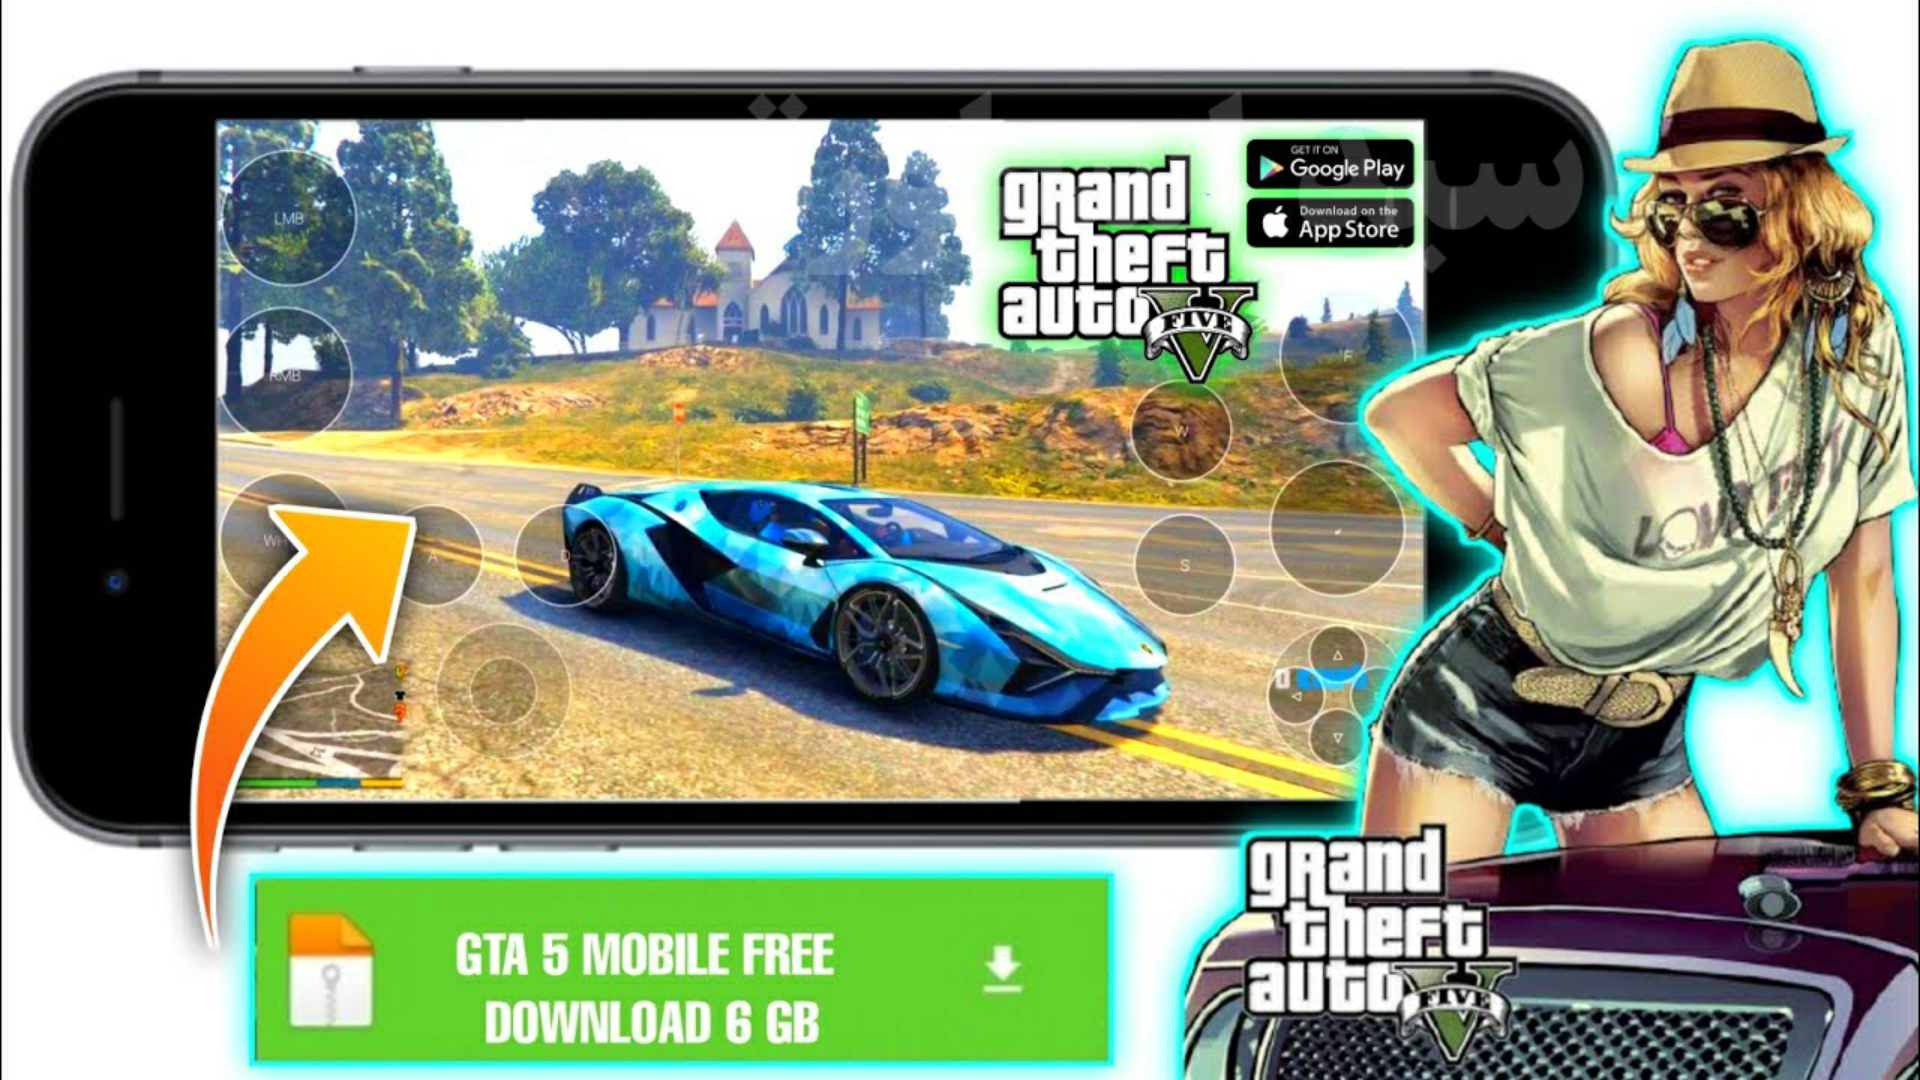 Gta 5 mobile android download for mobile фото 57